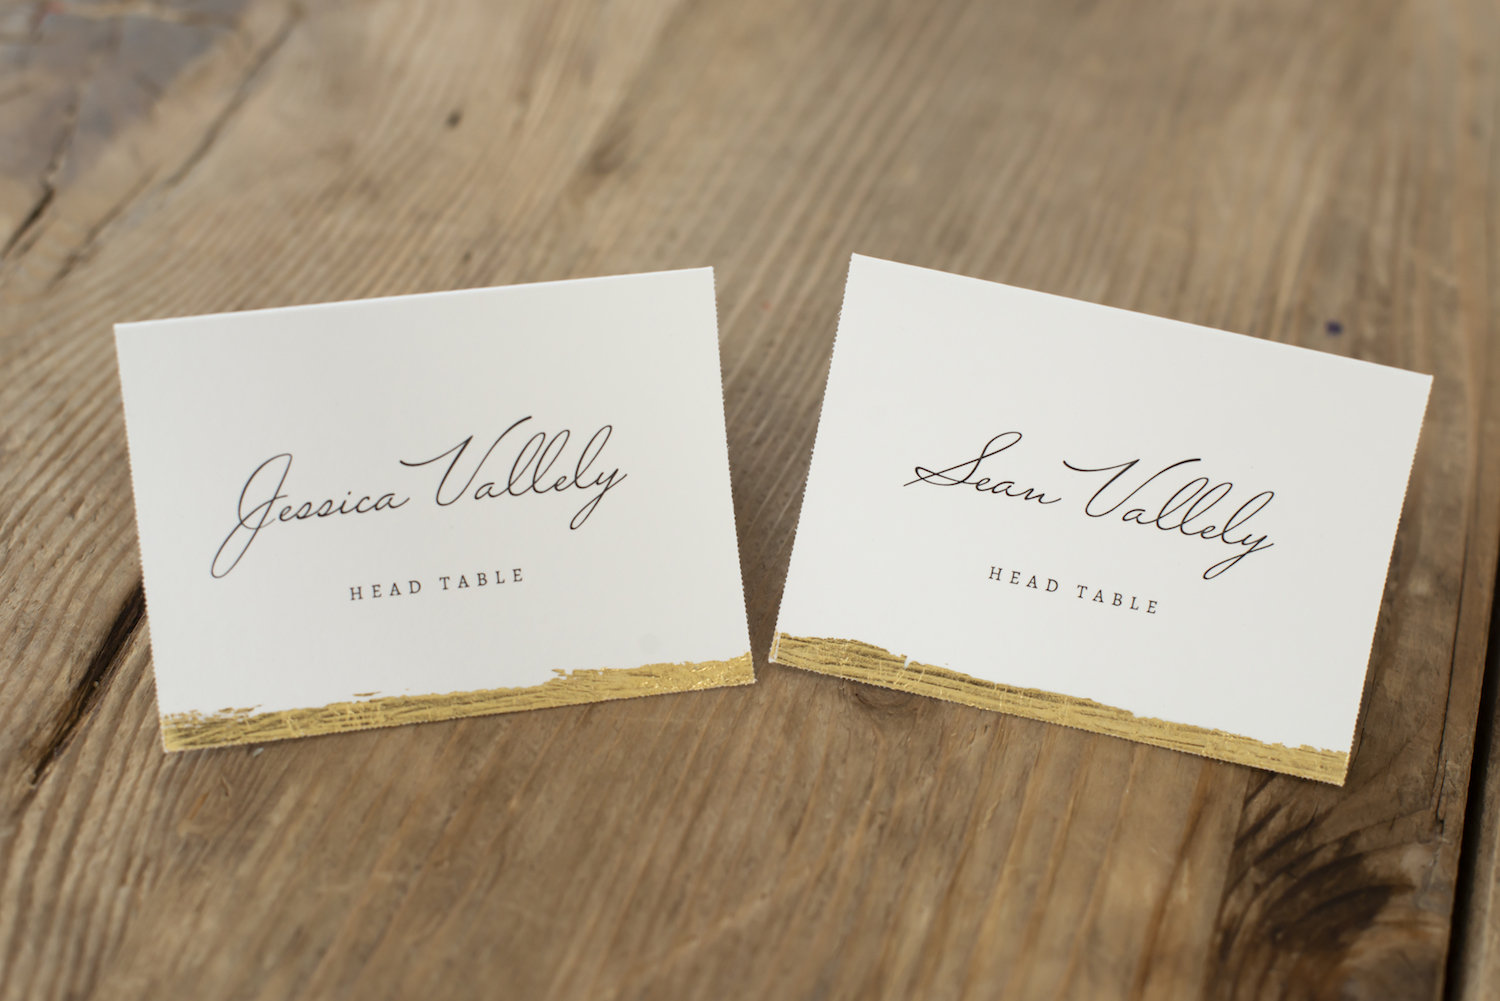 Bride and Groom name cards